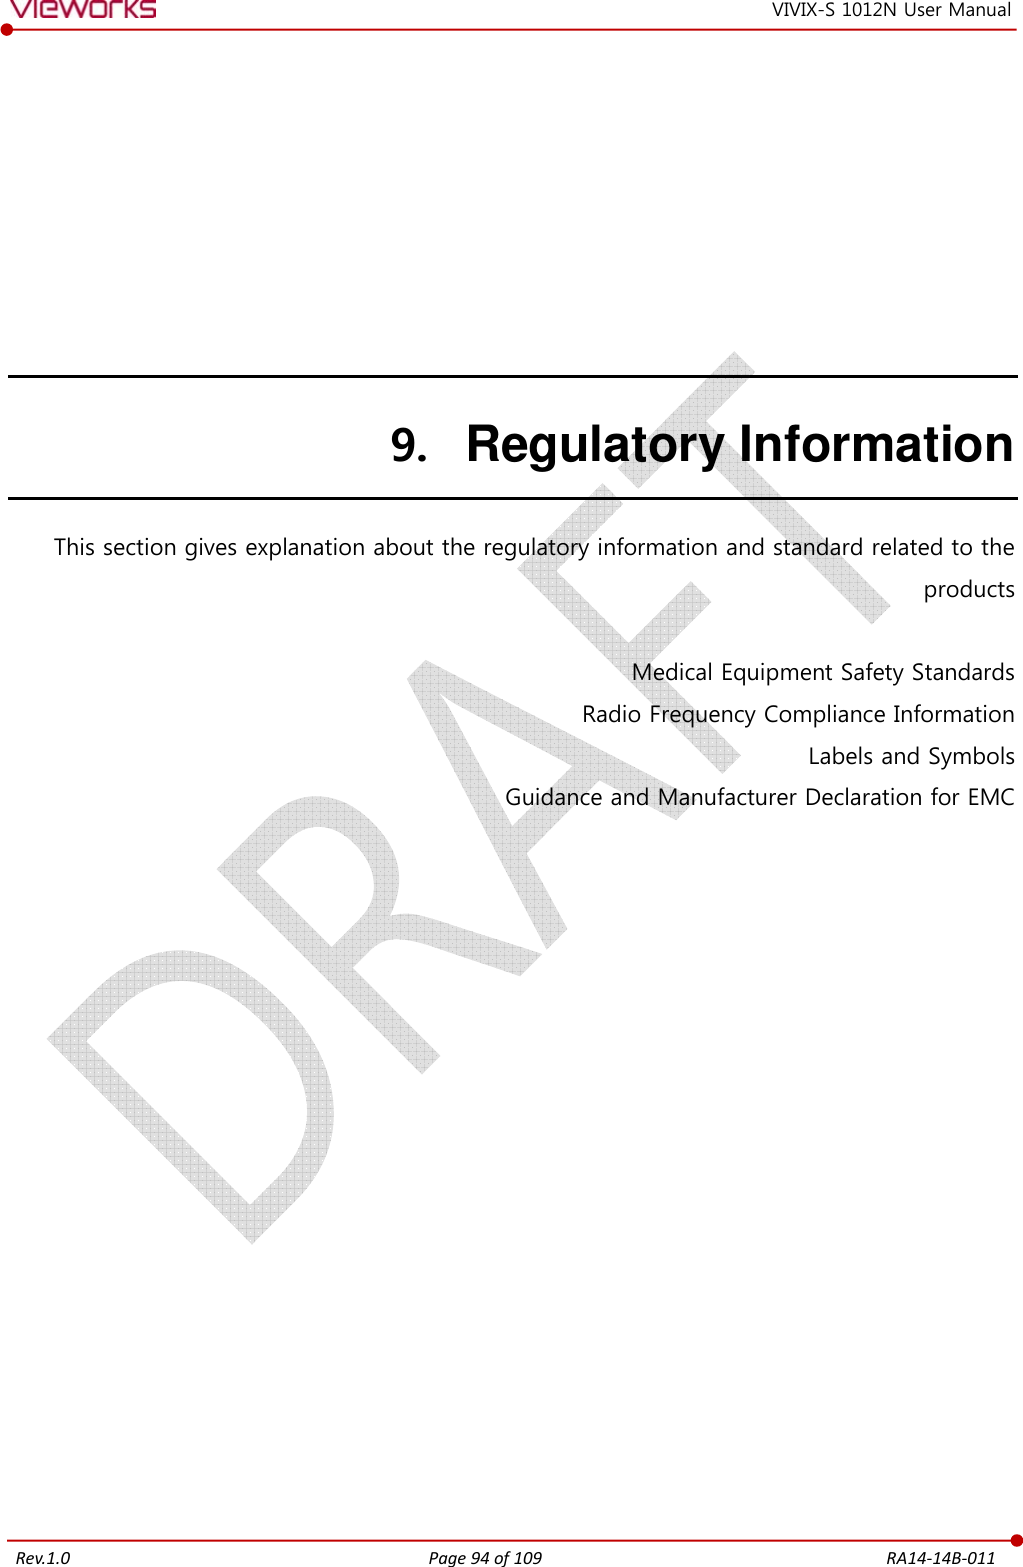   Rev.1.0 Page 94 of 109  RA14-14B-011 VIVIX-S 1012N User Manual 9. Regulatory Information This section gives explanation about the regulatory information and standard related to the products  Medical Equipment Safety Standards Radio Frequency Compliance Information Labels and Symbols Guidance and Manufacturer Declaration for EMC   